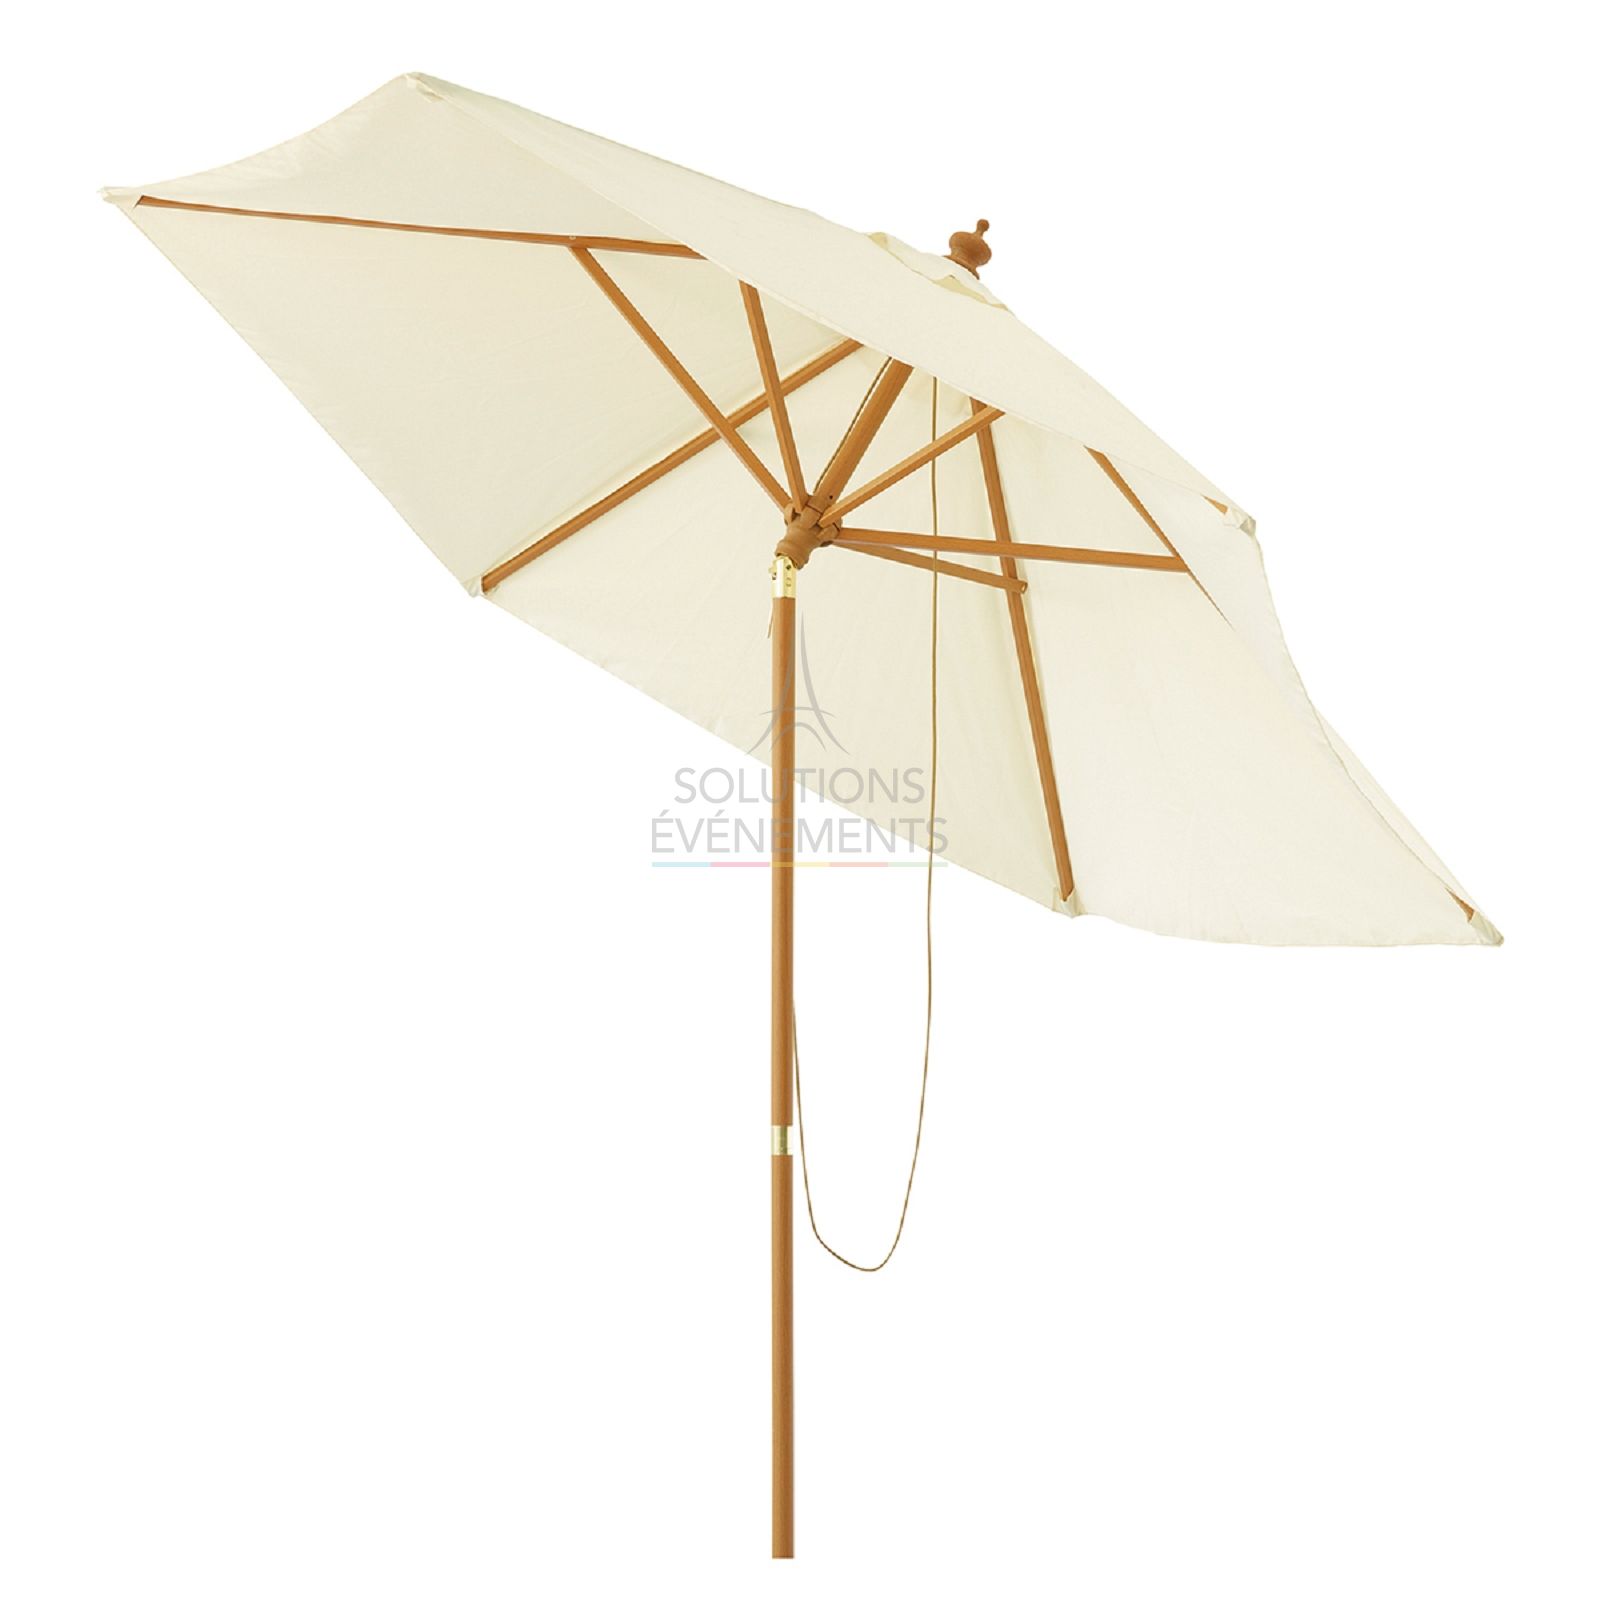 Rental of tilting fabric parasol for garden and terrace